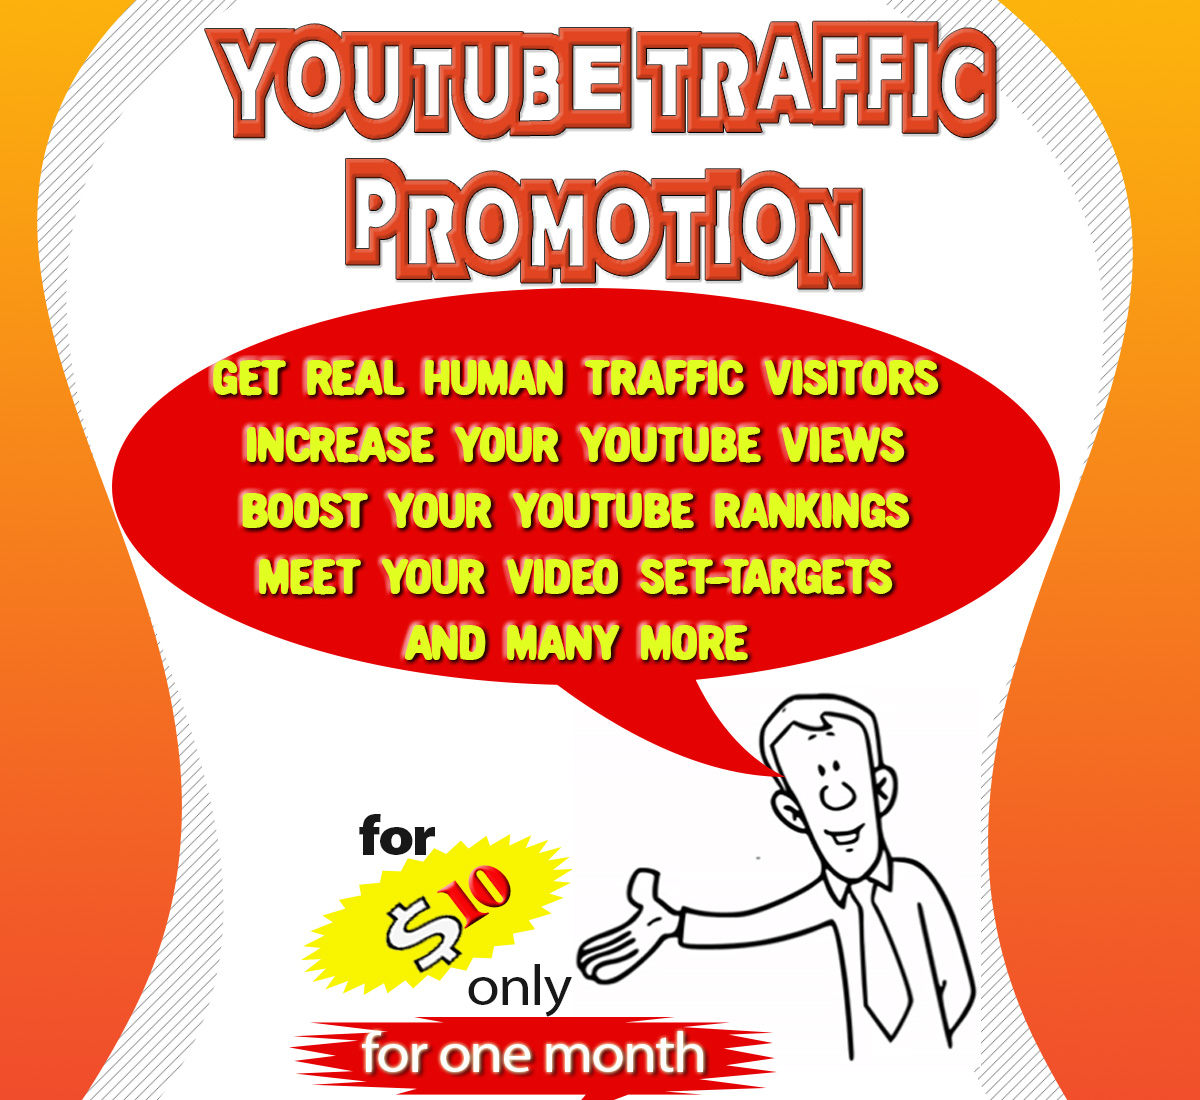 Drive Real Traffic Visitors to your Youtube Video for one month